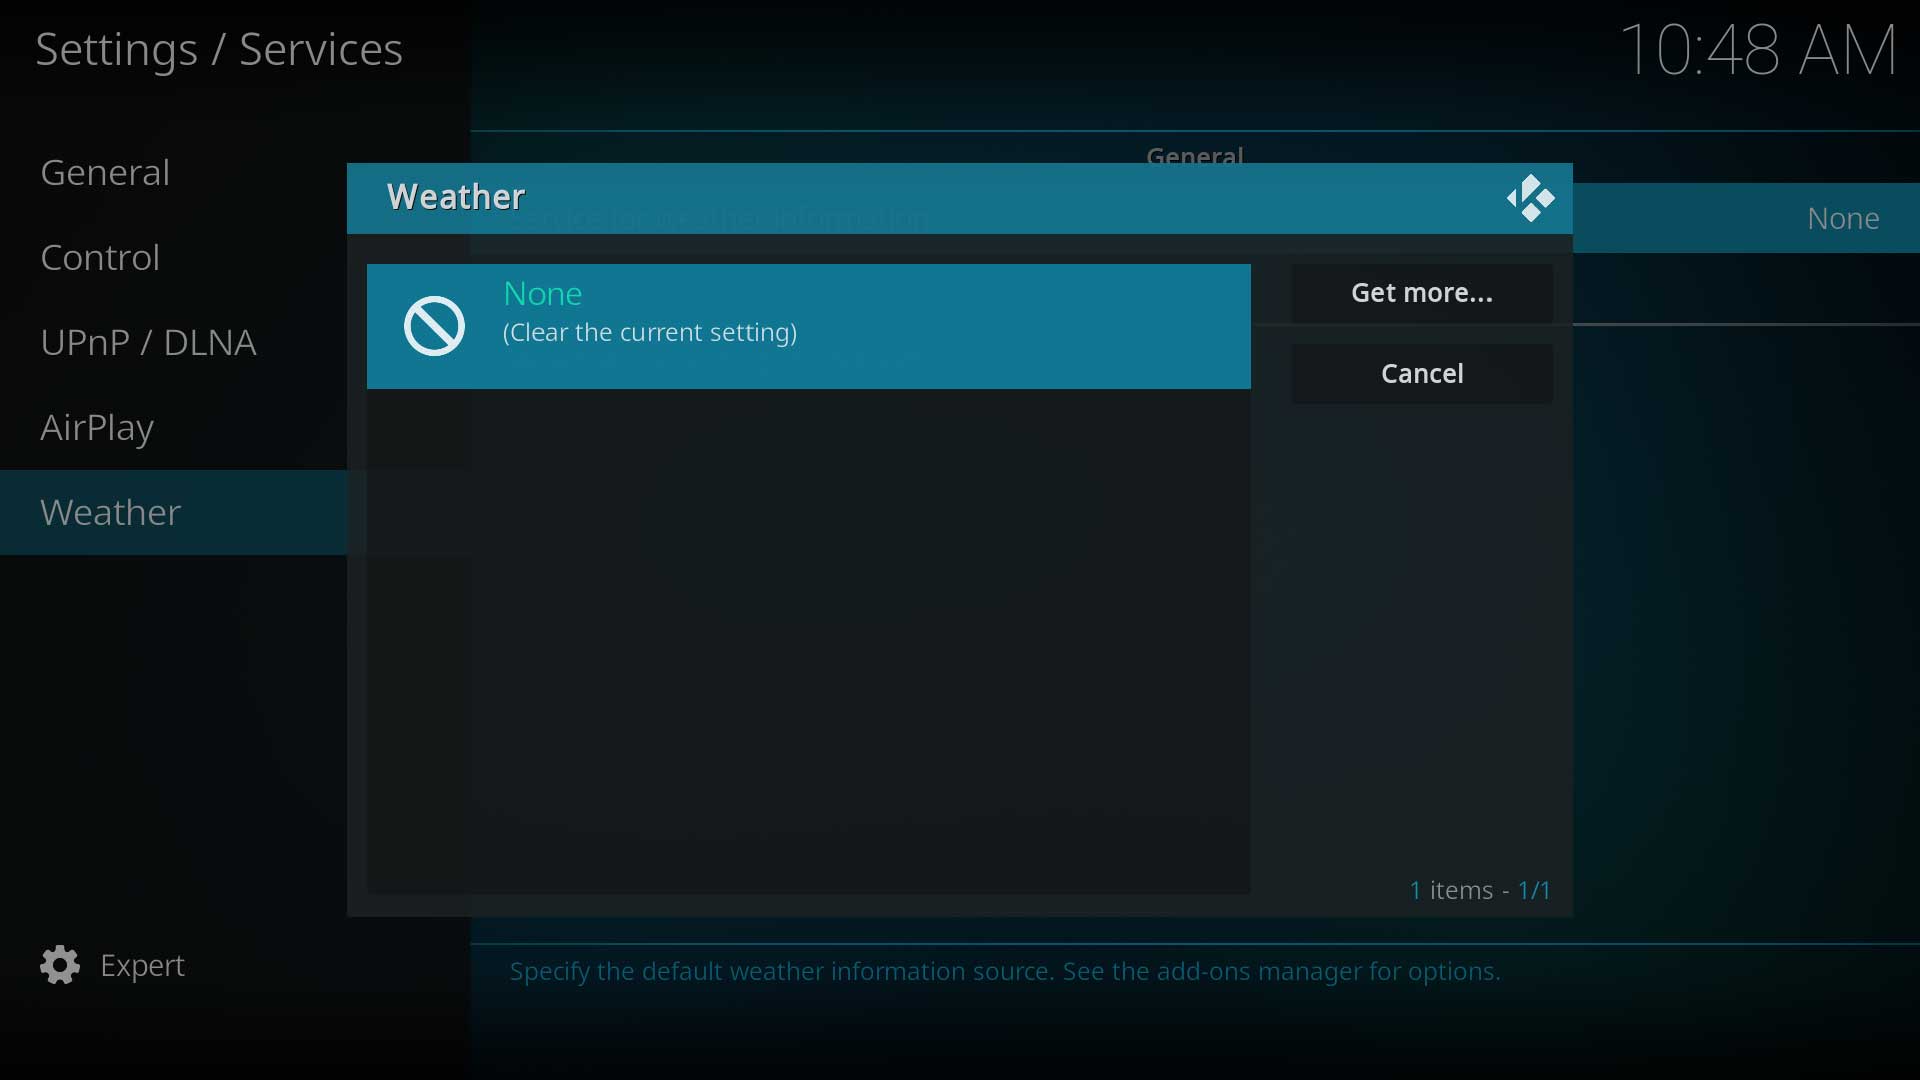 [Image 2] This dialog box shows the currently installed weather add-ons and allows you to choose one to be actively used